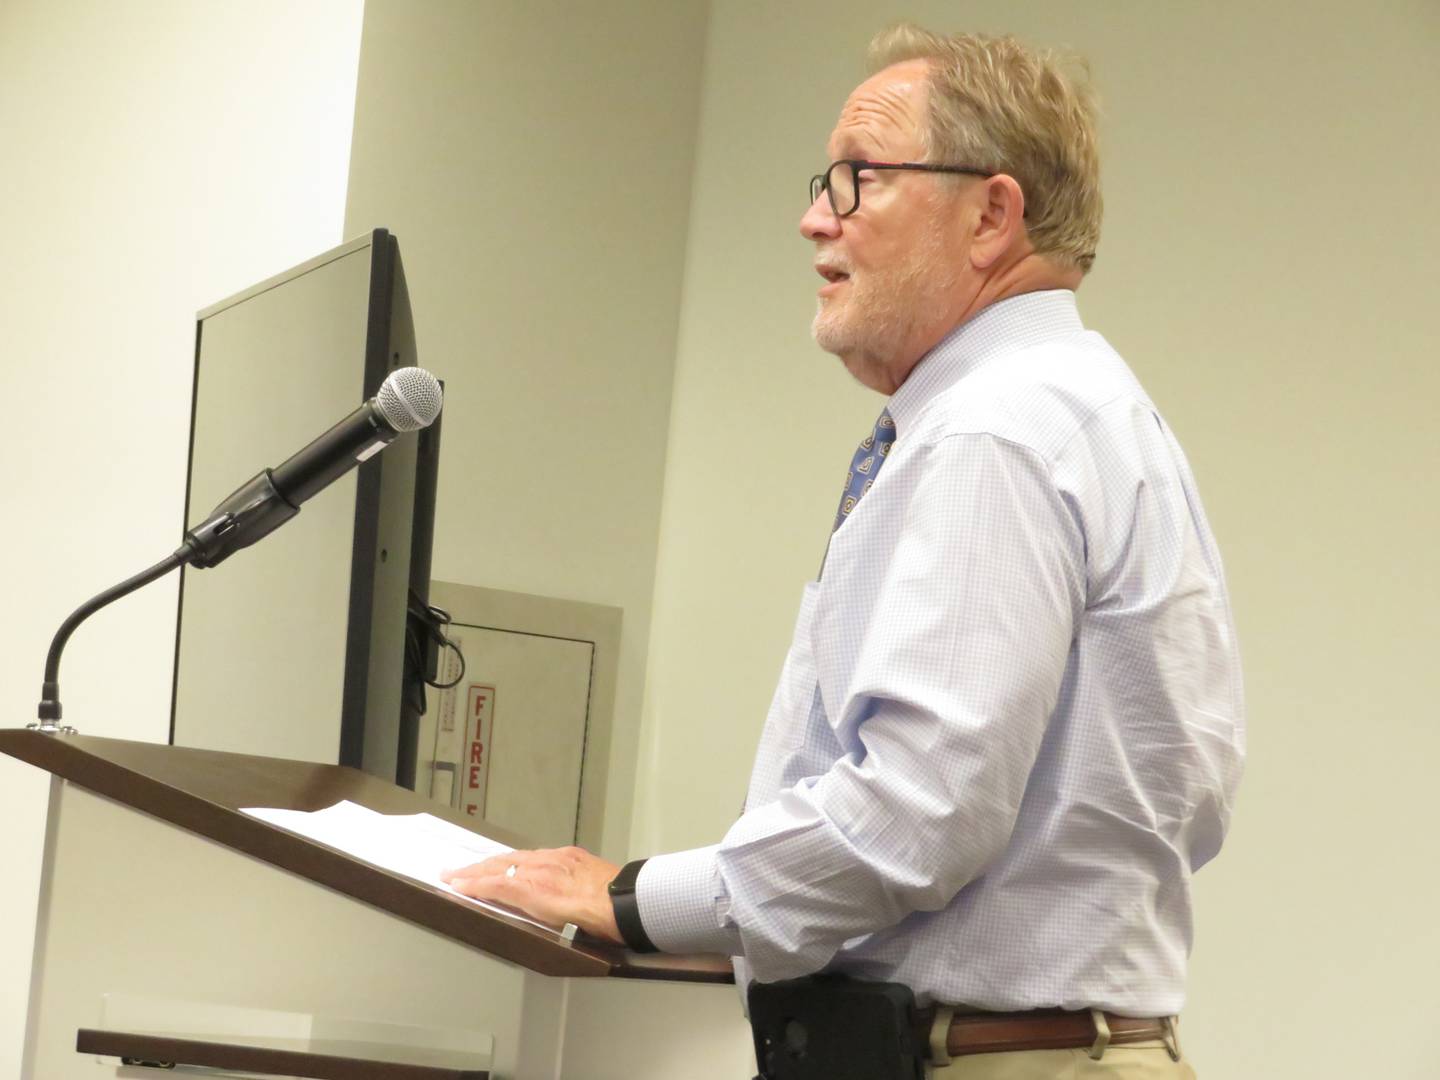 Paul Borek, executive director for DeKalb County Economic Development Corporation, reads a prepared statement in support of Project Barb during the Monday, July 26, 2021 DeKalb City Council meeting at DeKalb Public Library.